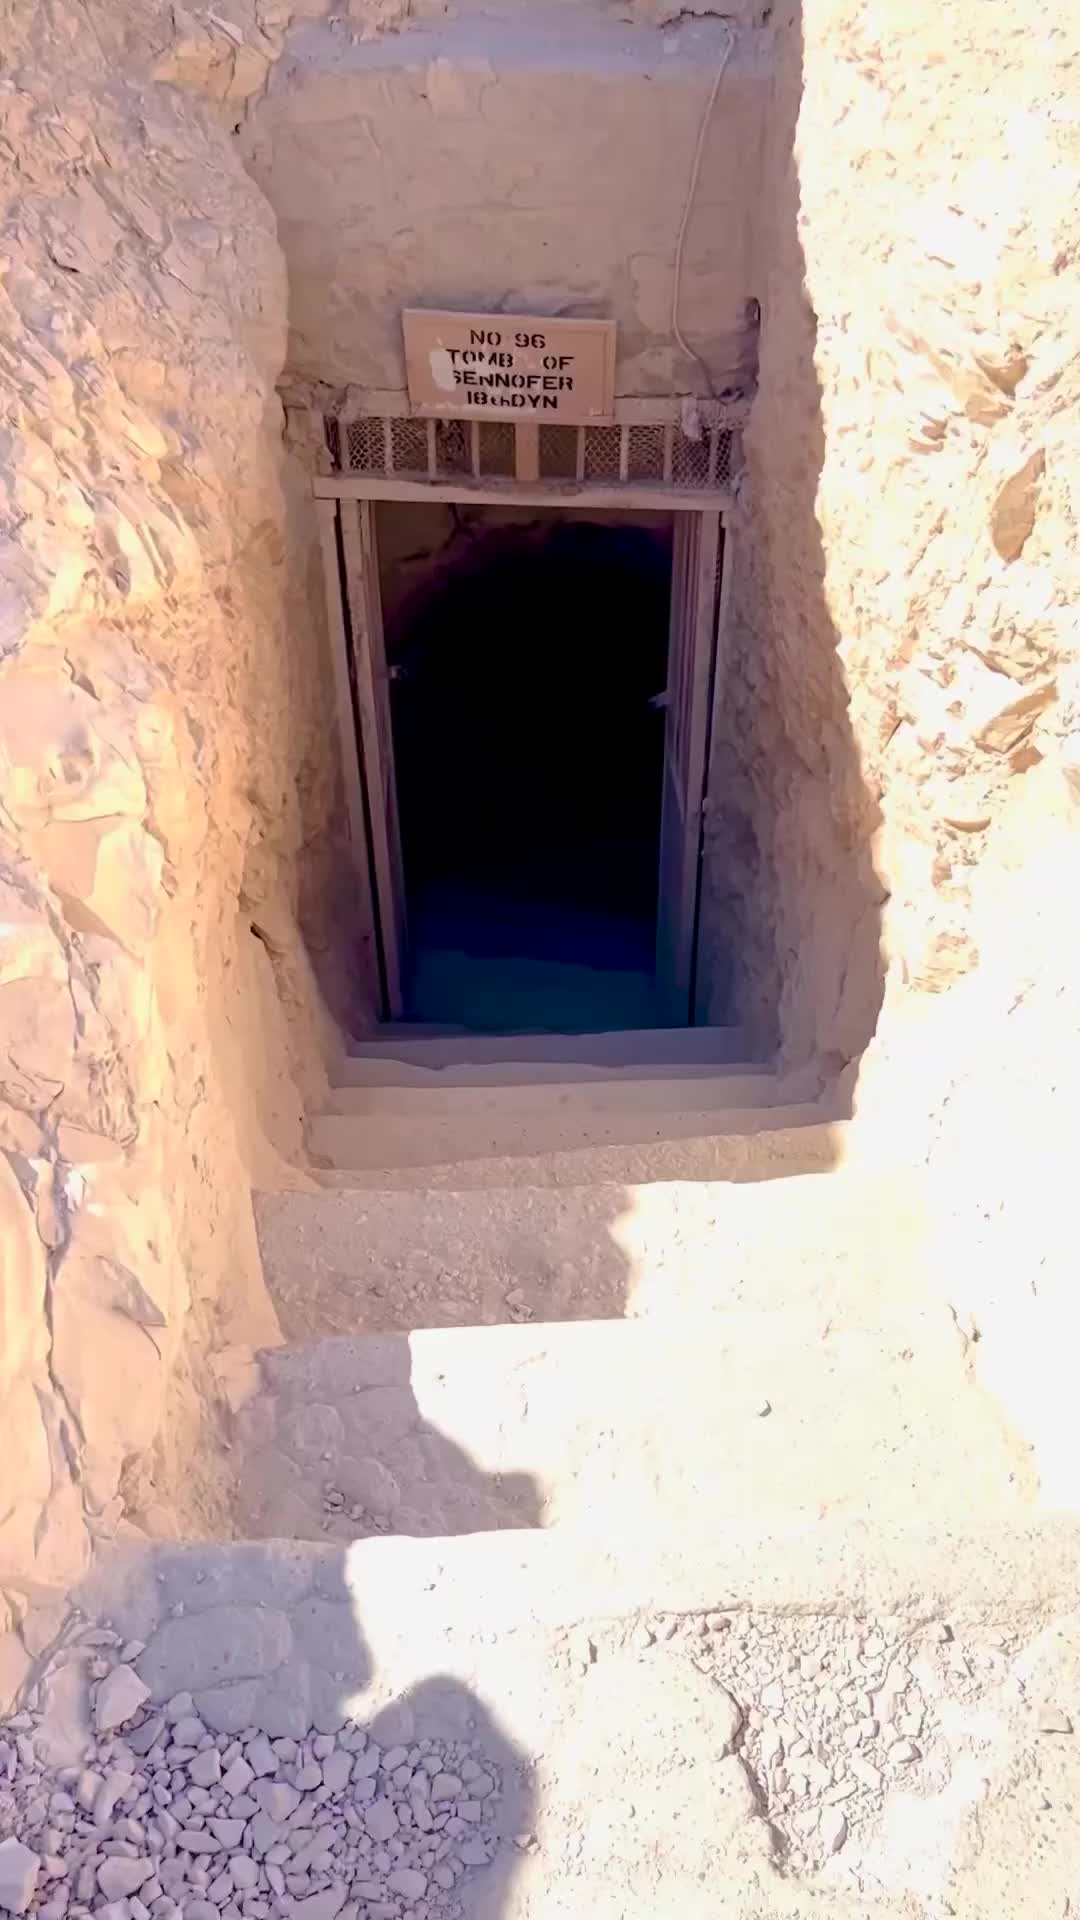 Explore the Ancient Tomb of Sennefer TT96 in Egypt